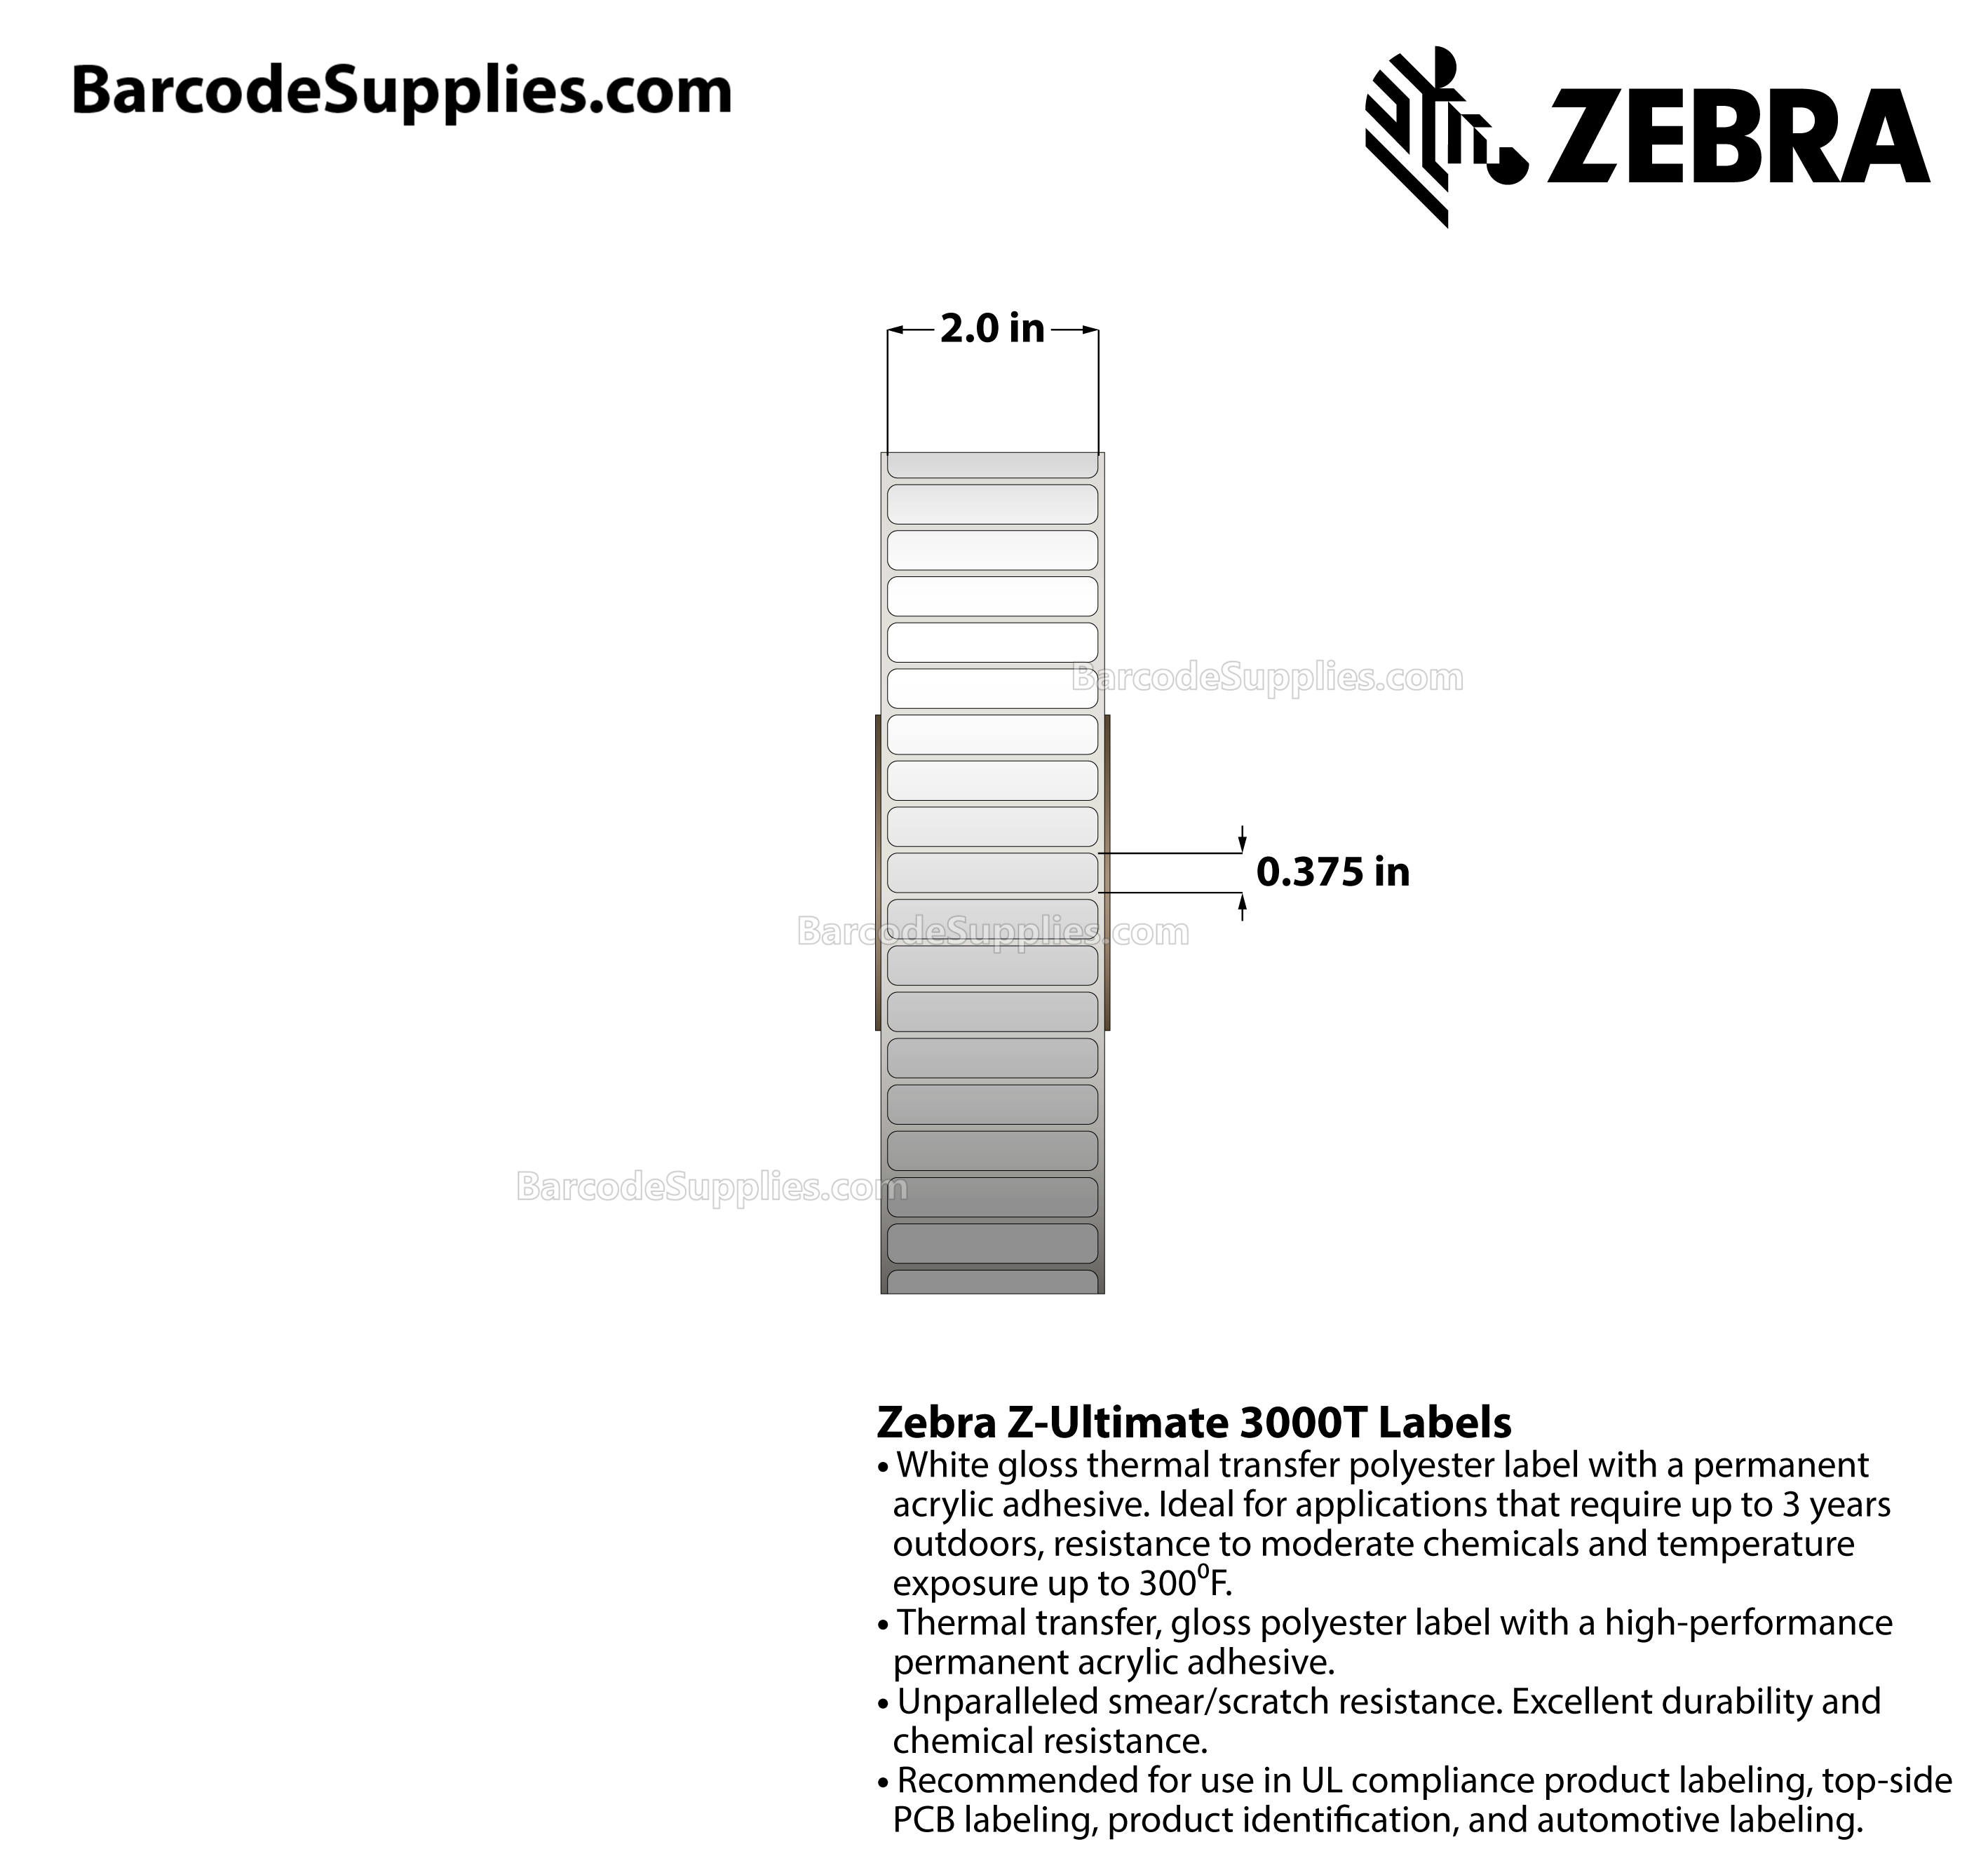 2 x 0.375 Thermal Transfer White Z-Ultimate 3000T Labels With Permanent Adhesive - Not Perforated - 10000 Labels Per Roll - Carton Of 4 Rolls - 40000 Labels Total - MPN: 10011695